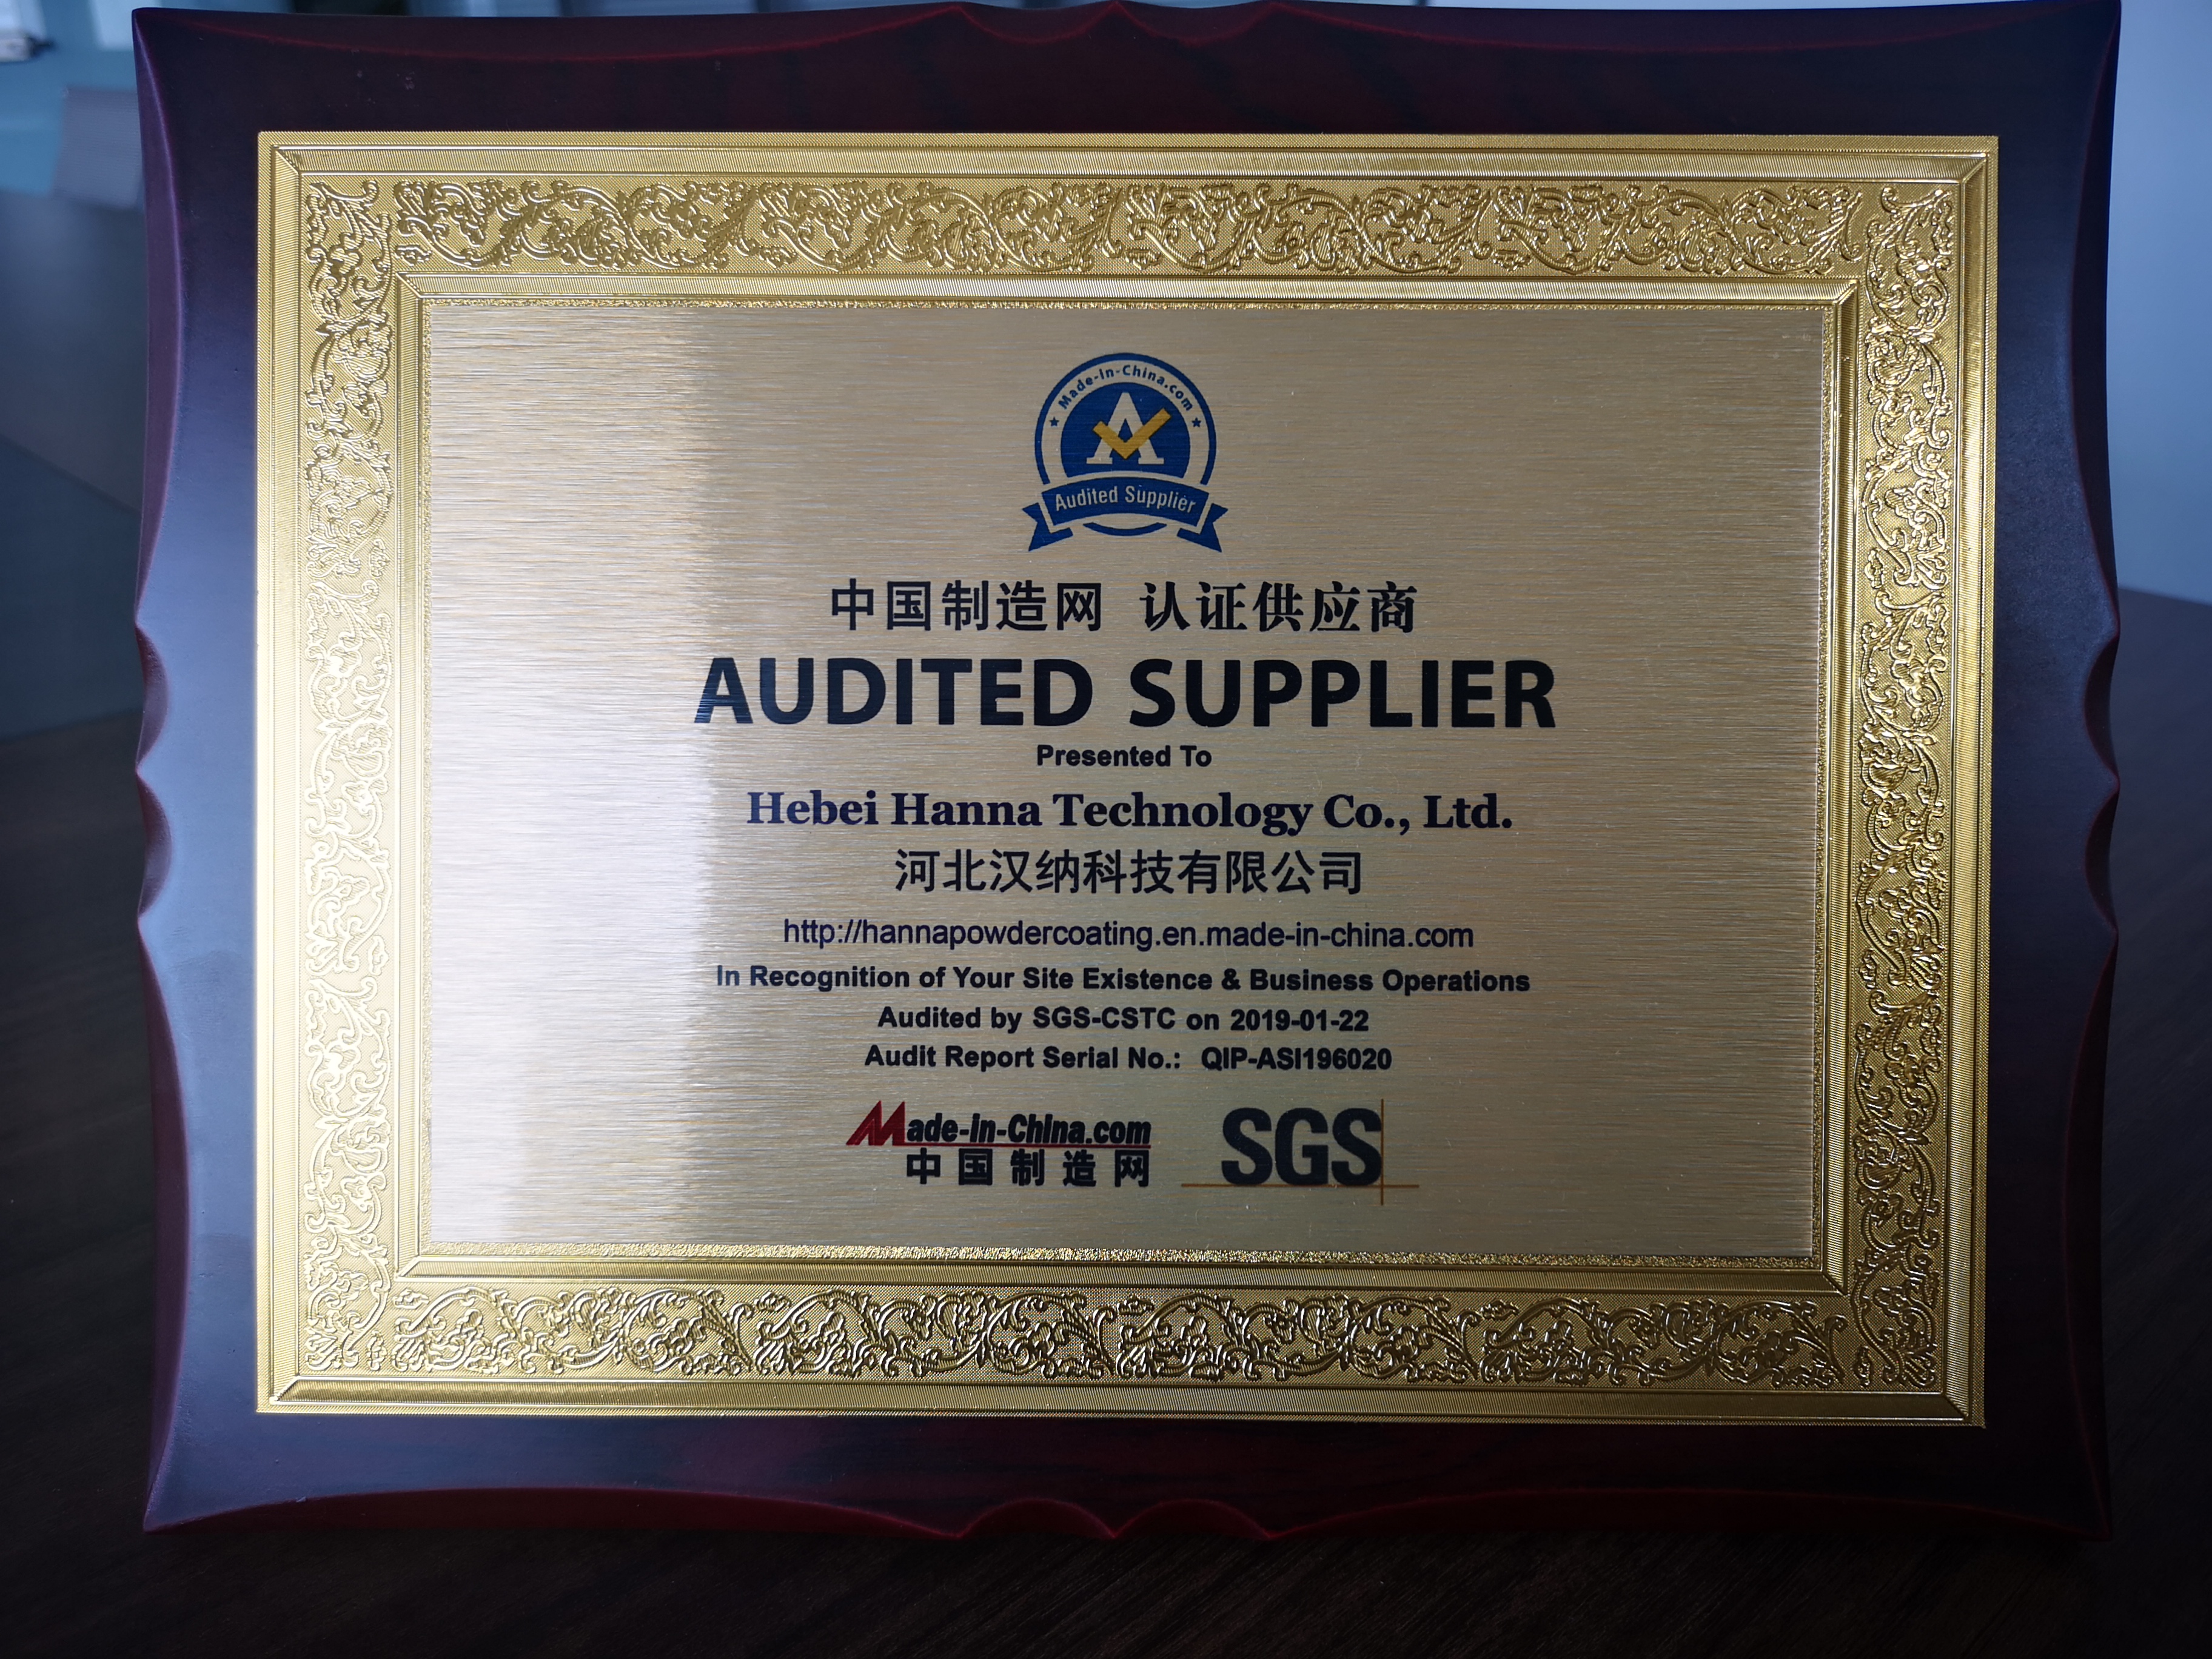 Made-In-China Audited Supplier